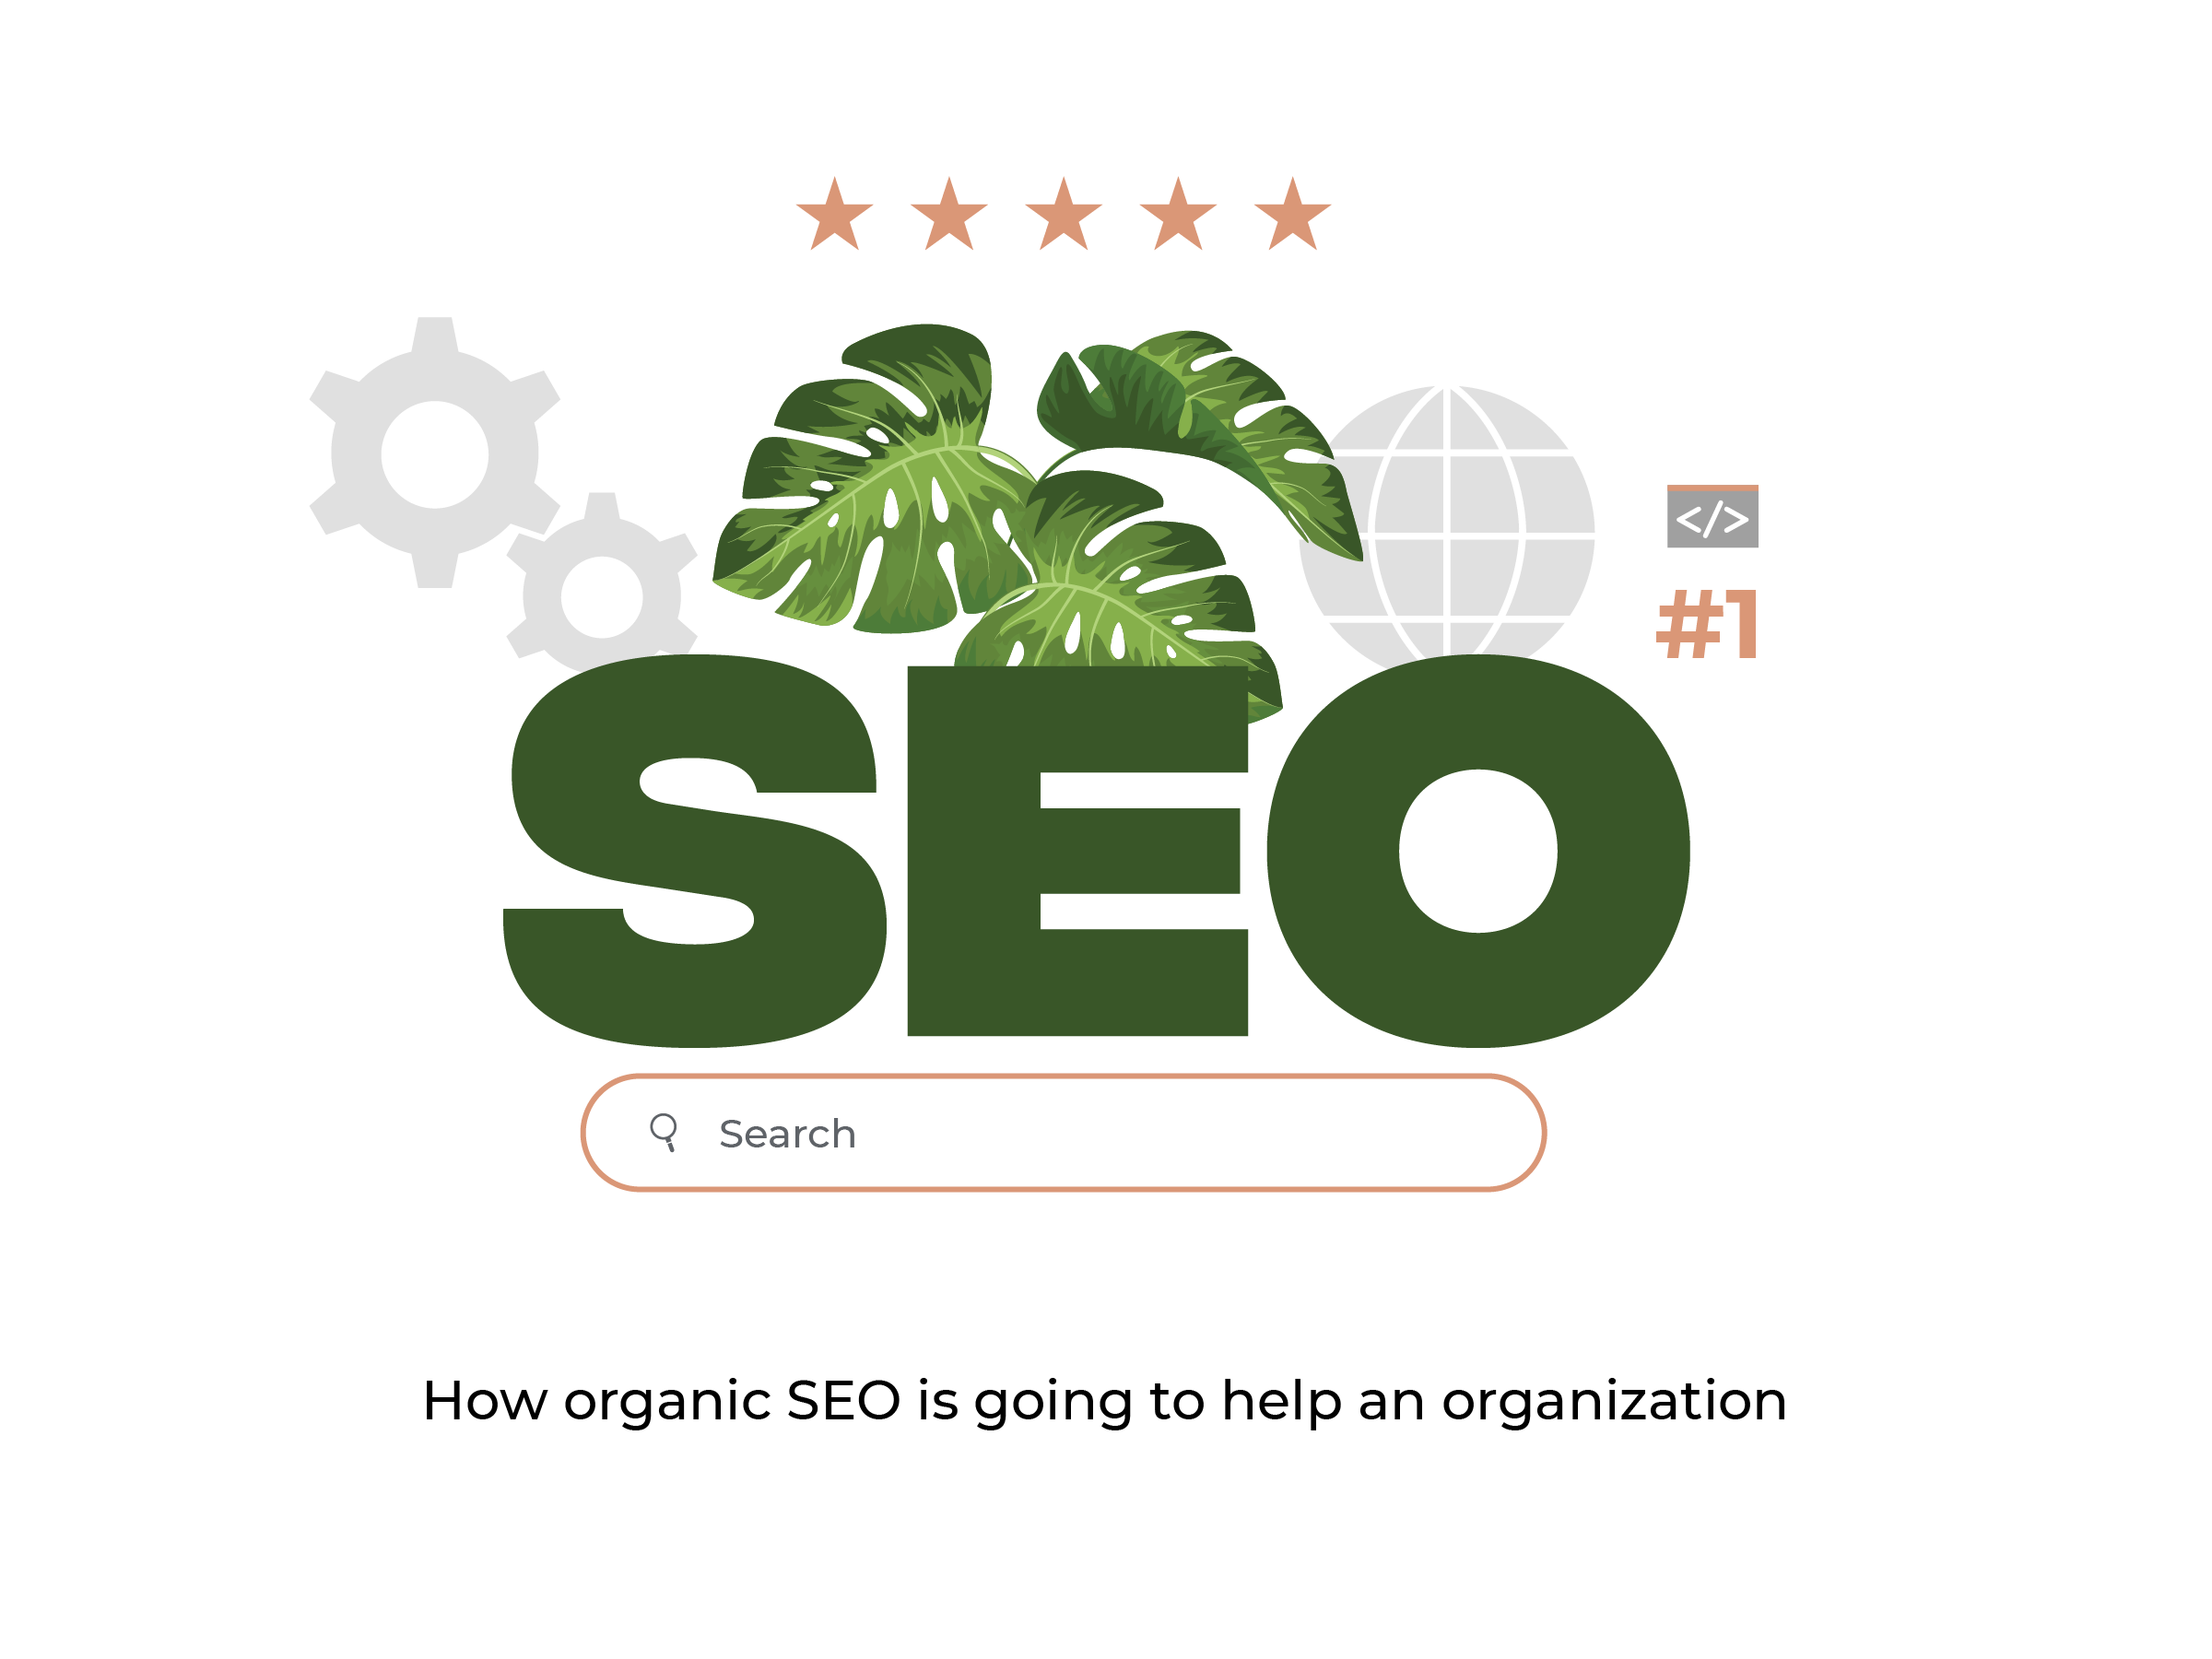 How organic SEO is going to help an organization